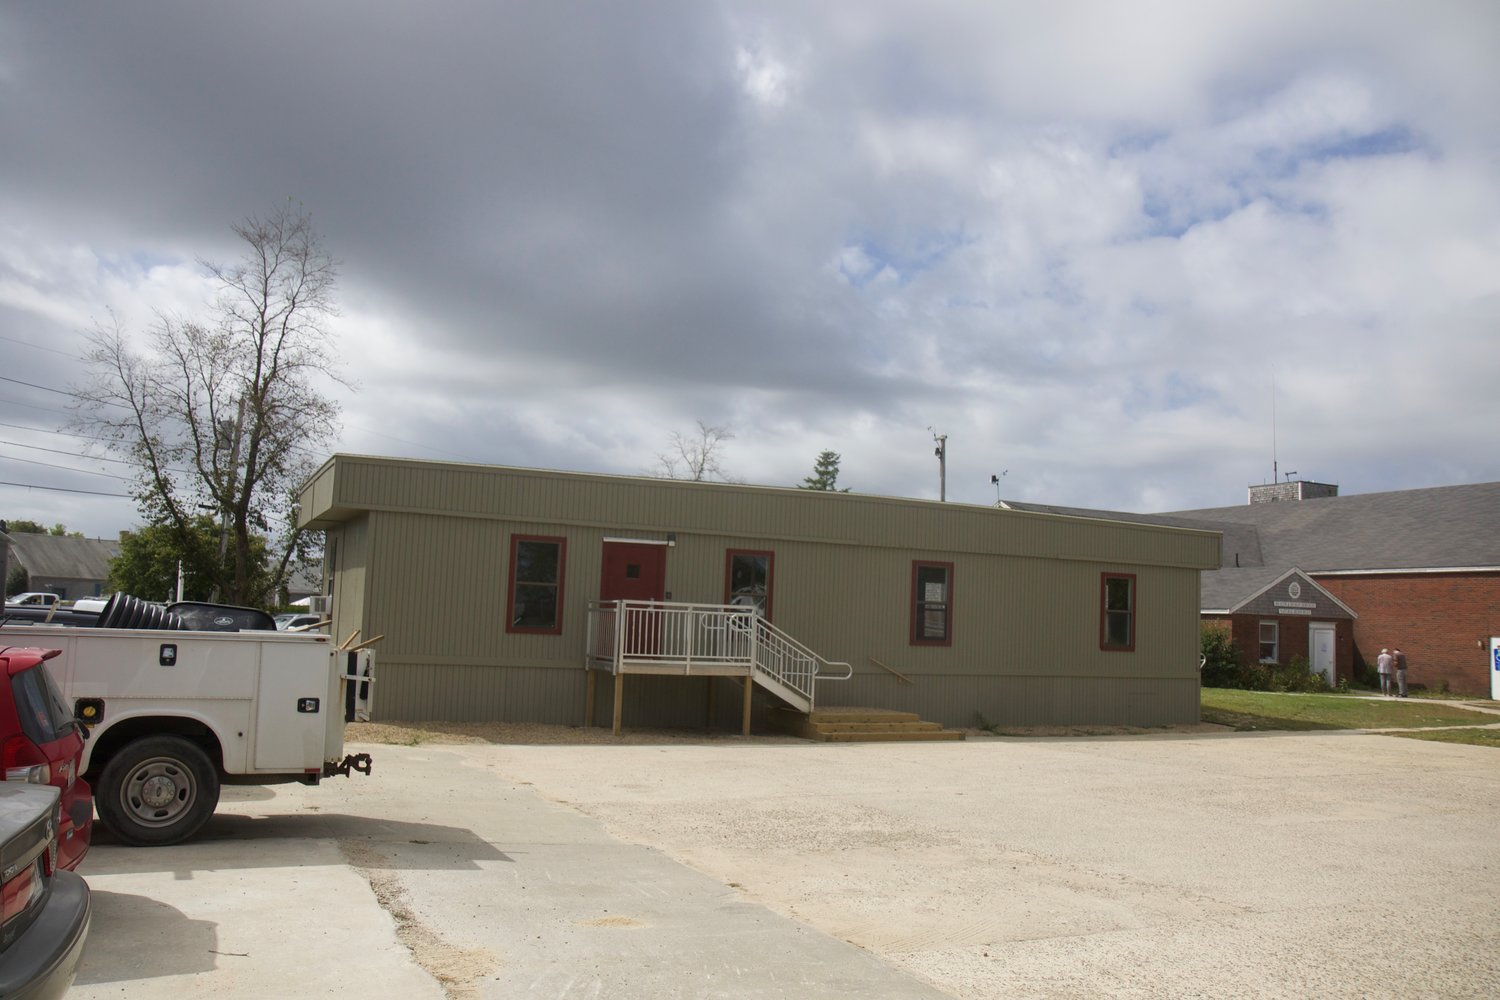 The Historic District Commission has denied a town request to keep this modular trailer on the former fire-station property at the Sparks Avenue rotary.